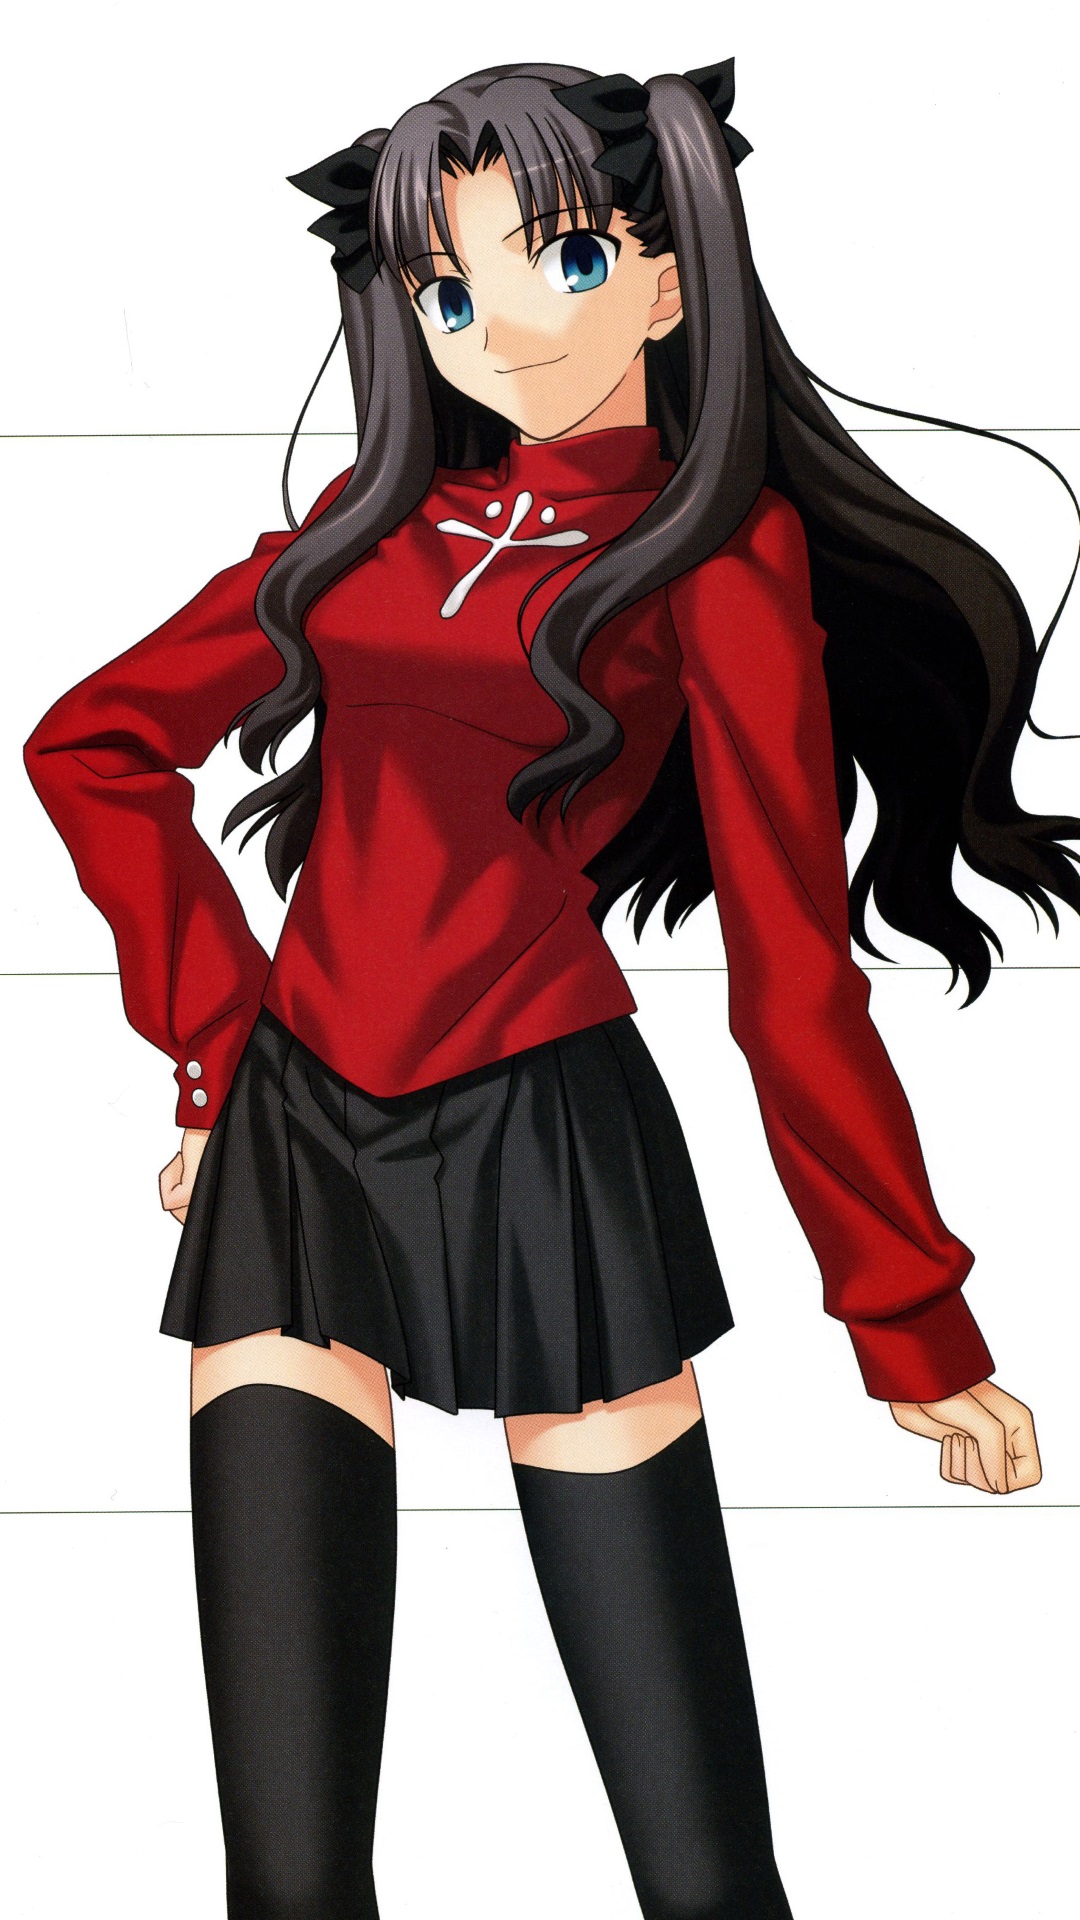 Fate Stay Night Unlimited Blade Works Rin Tohsaka wallpaper for iPhone